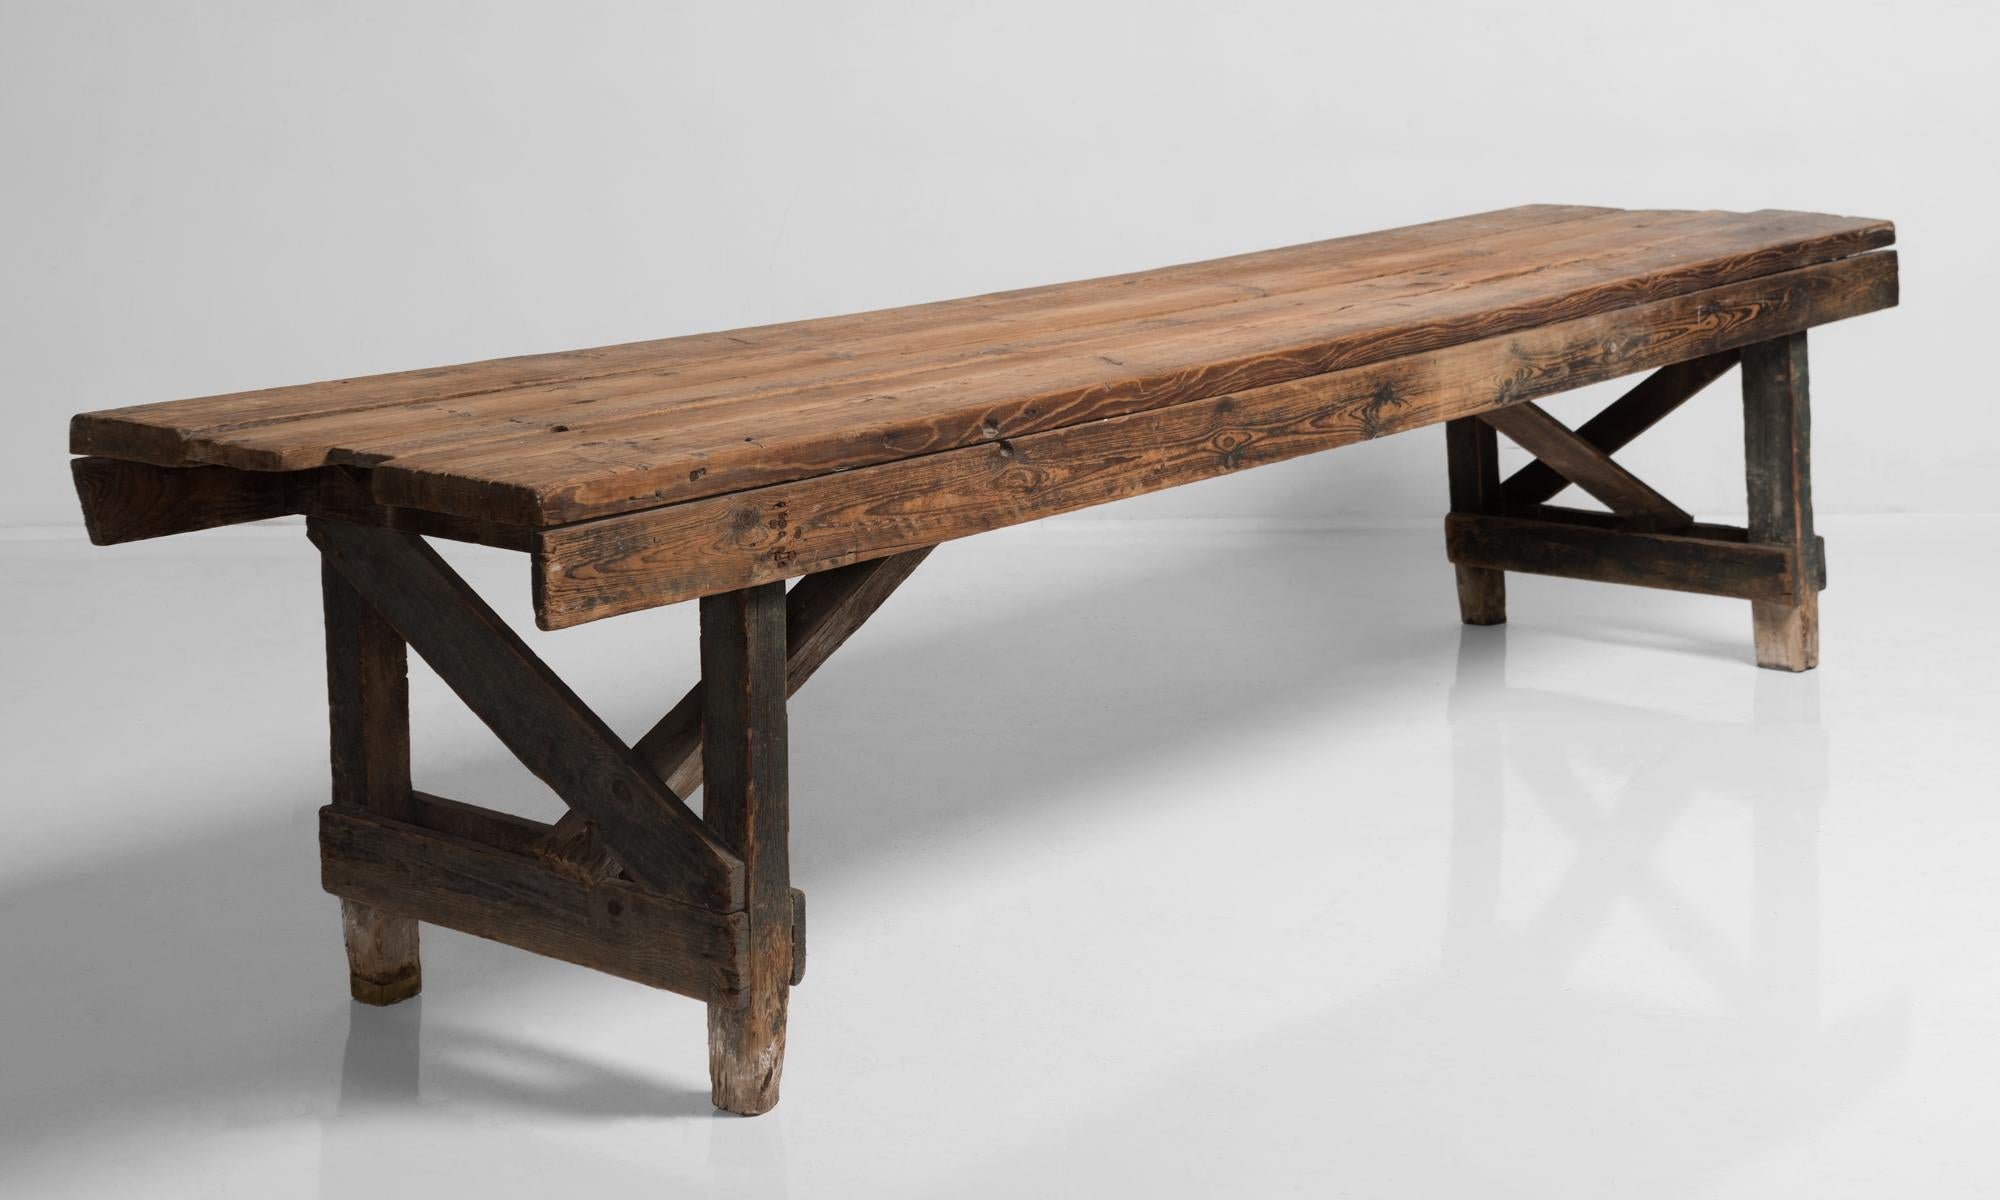 Primitive dining table, France, 19th century.

Rustic construction with substantial supports, plank top and amazing patina.